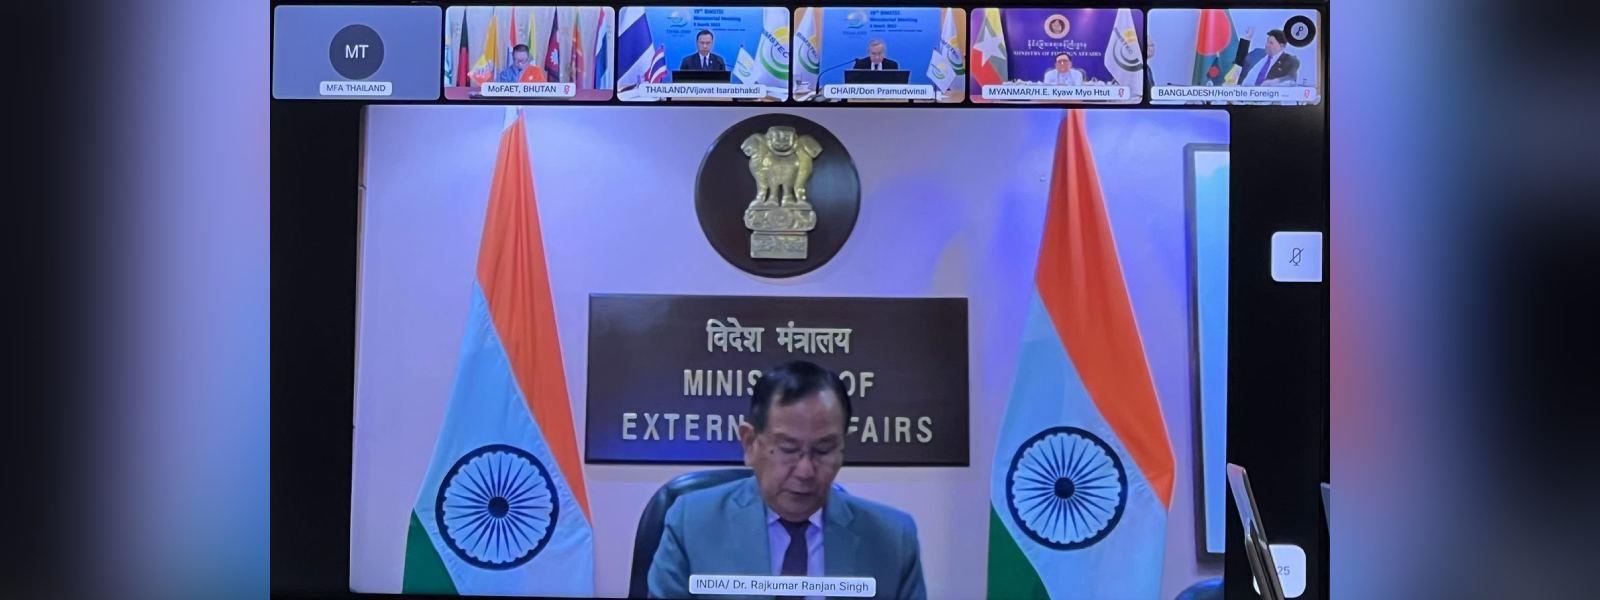 Minister of State for External Affairs, Dr. Rajkumar Ranjan Singh attended the 19th BIMSTEC Ministerial Meeting hosted virtually